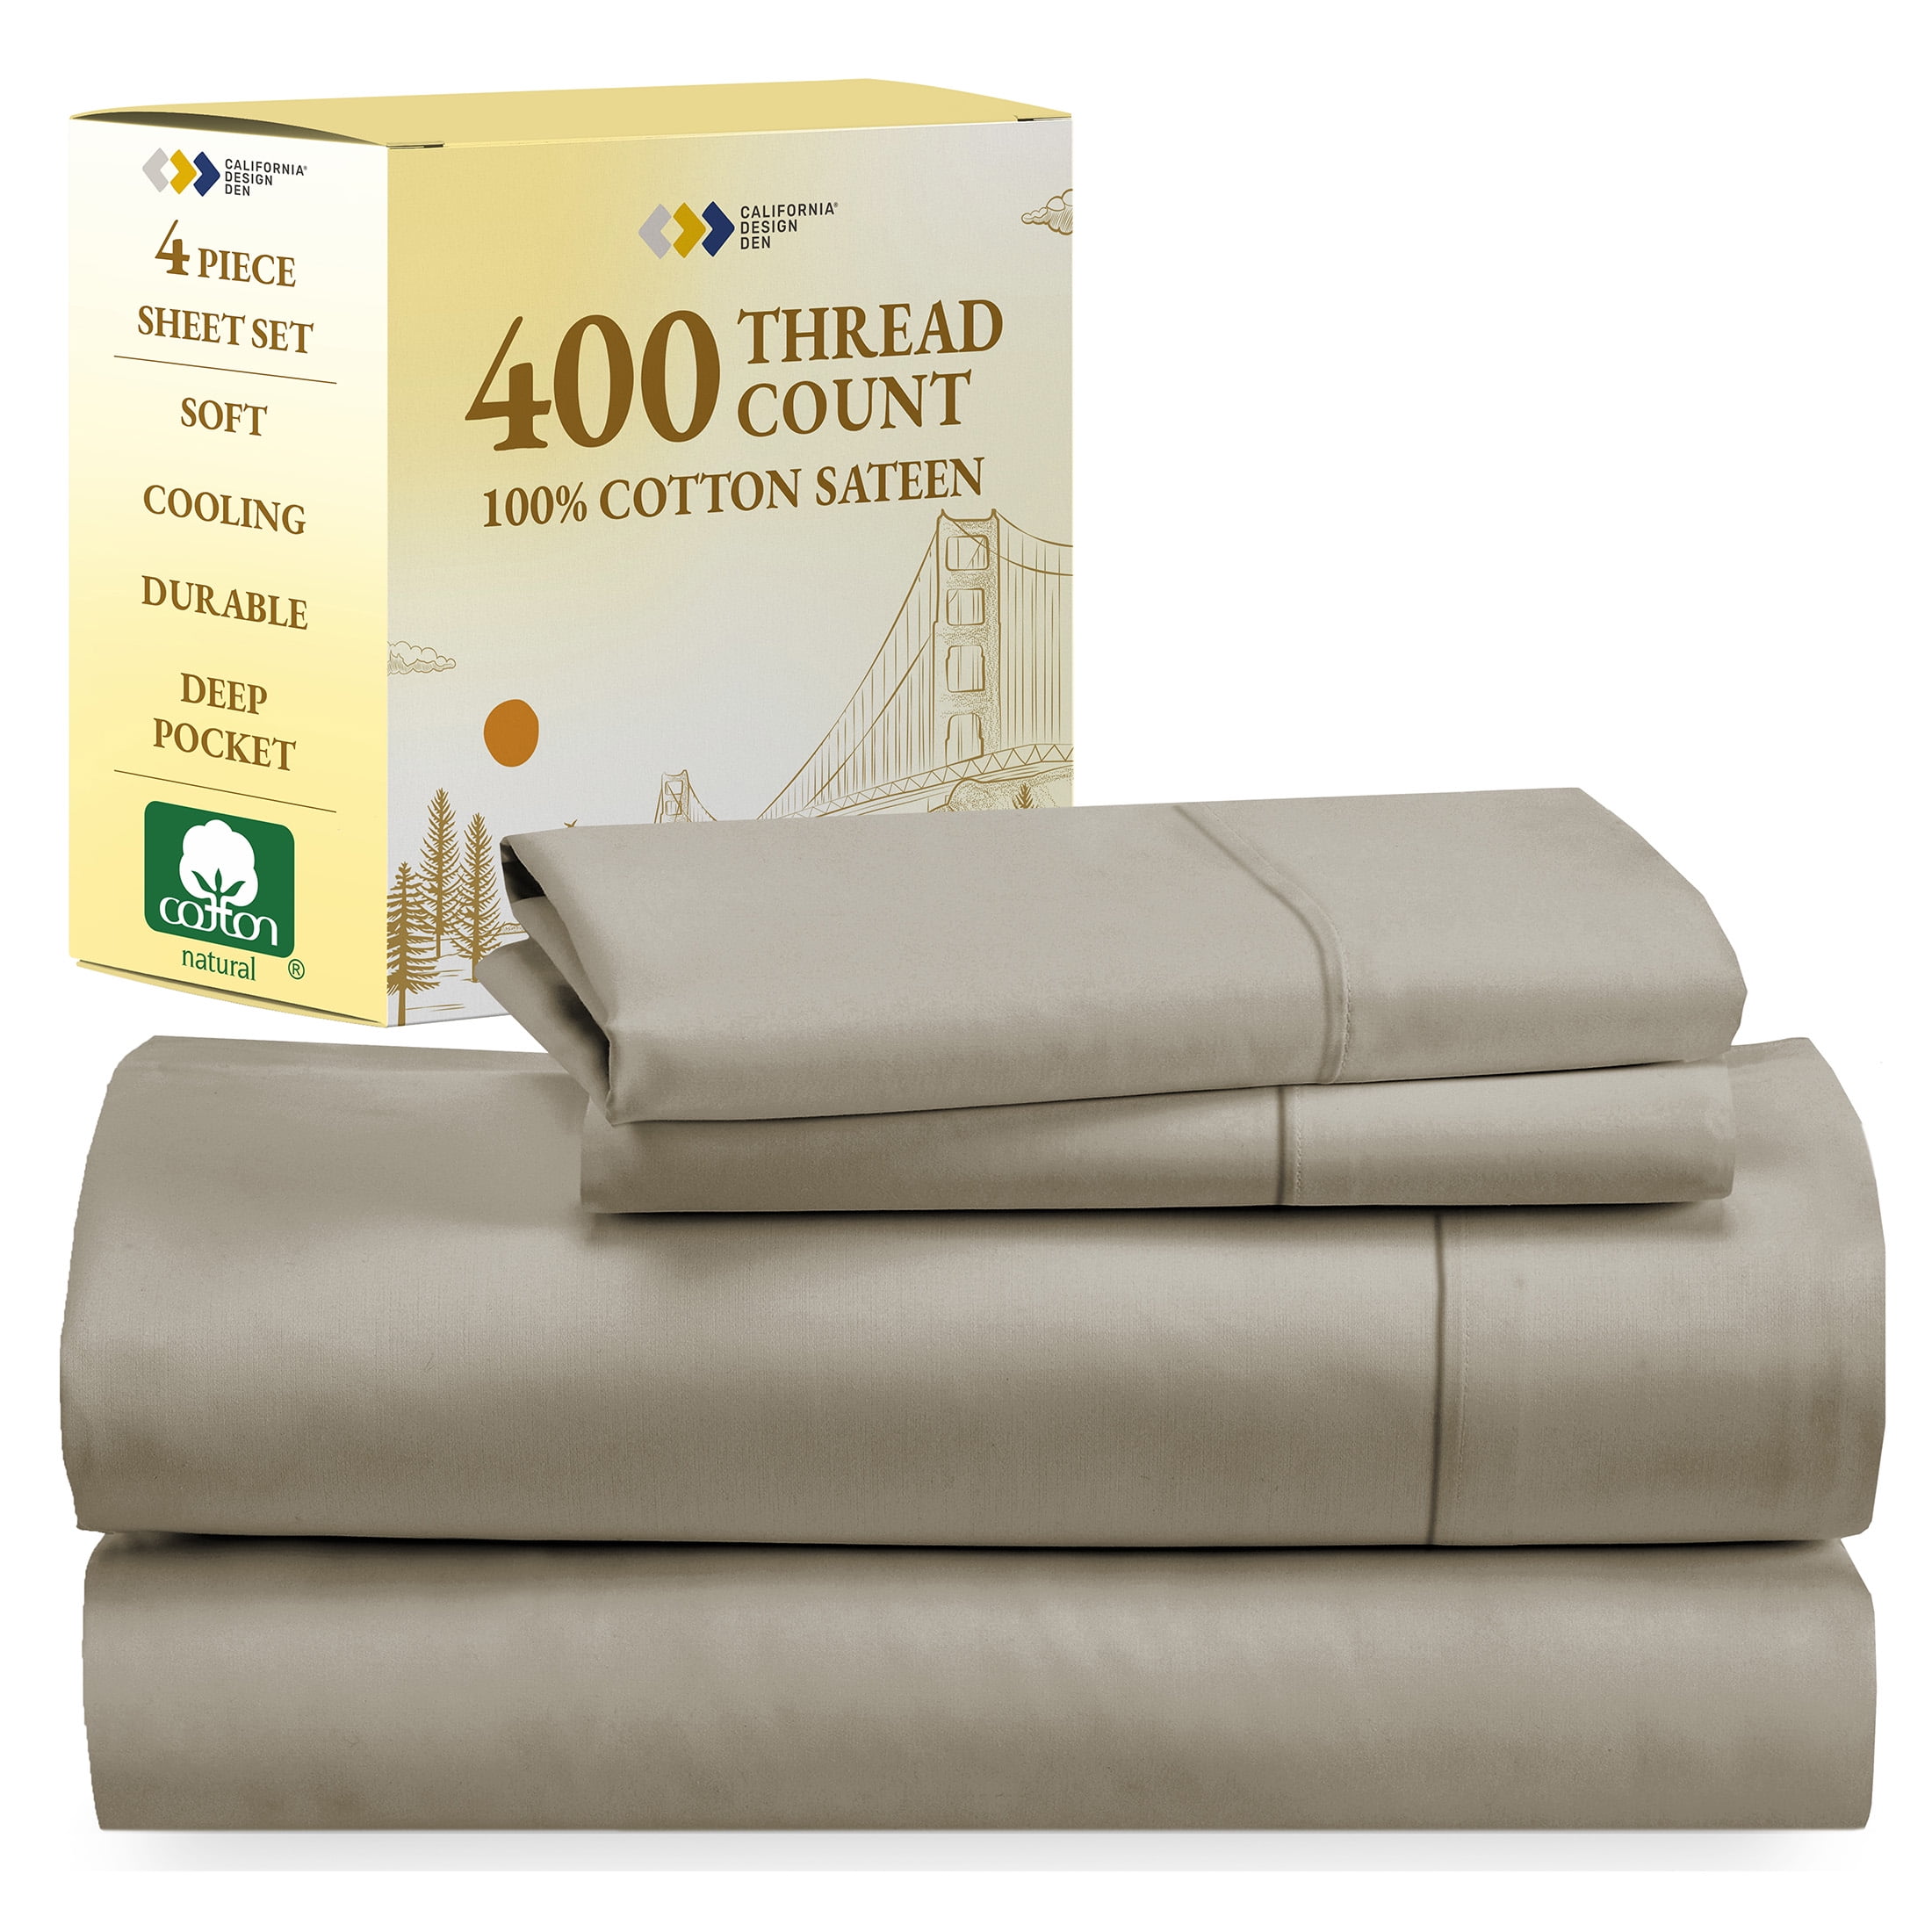 California Design Den 400 Thread Count 100% Cotton Sateen Weave Sheet Set, Queen Size, Taupe - image 1 of 10